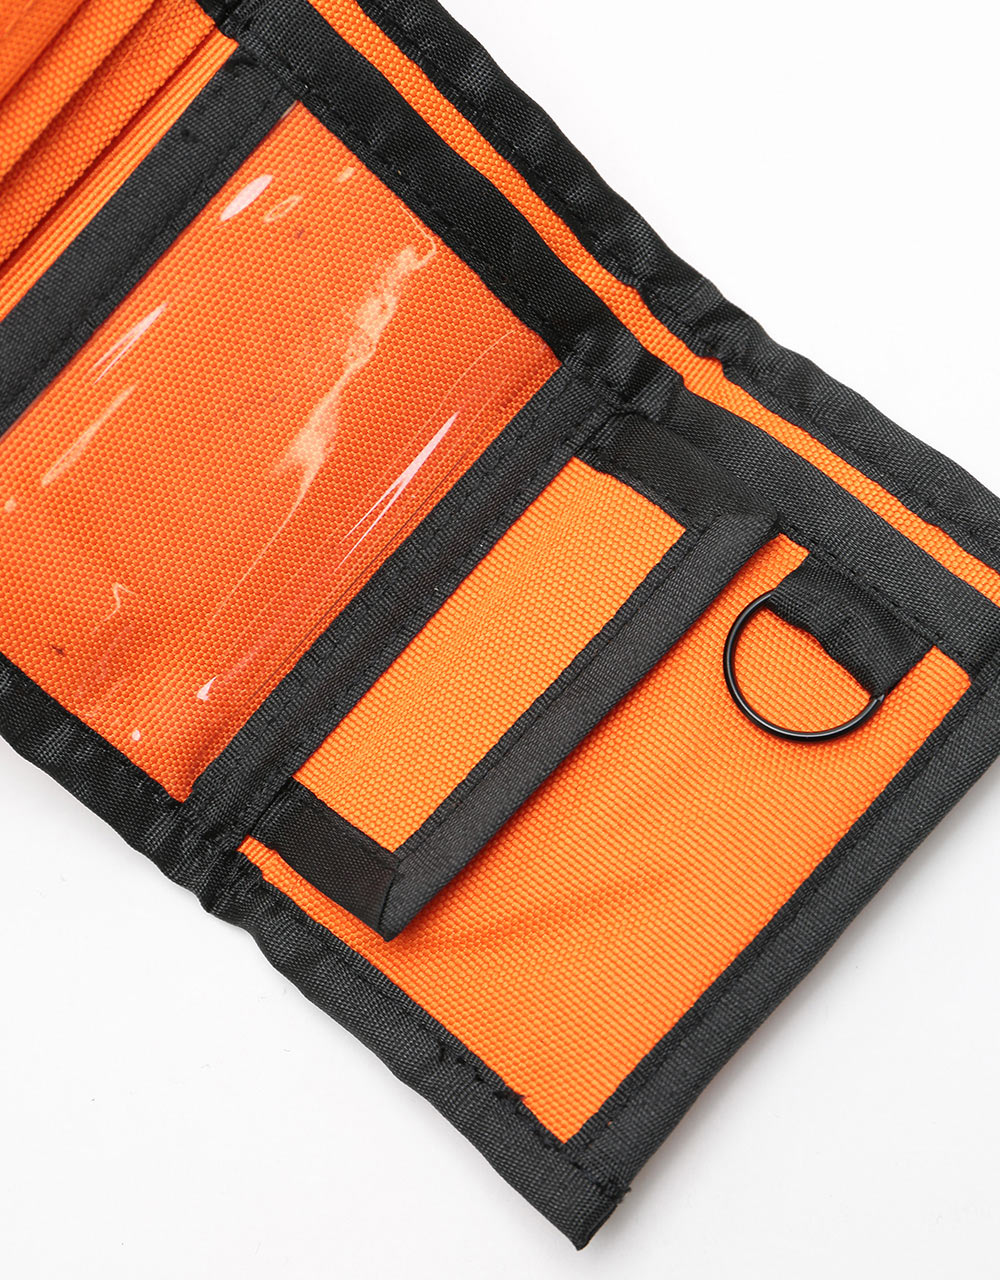 Route One Athletic Tri-Fold Wallet - Orange